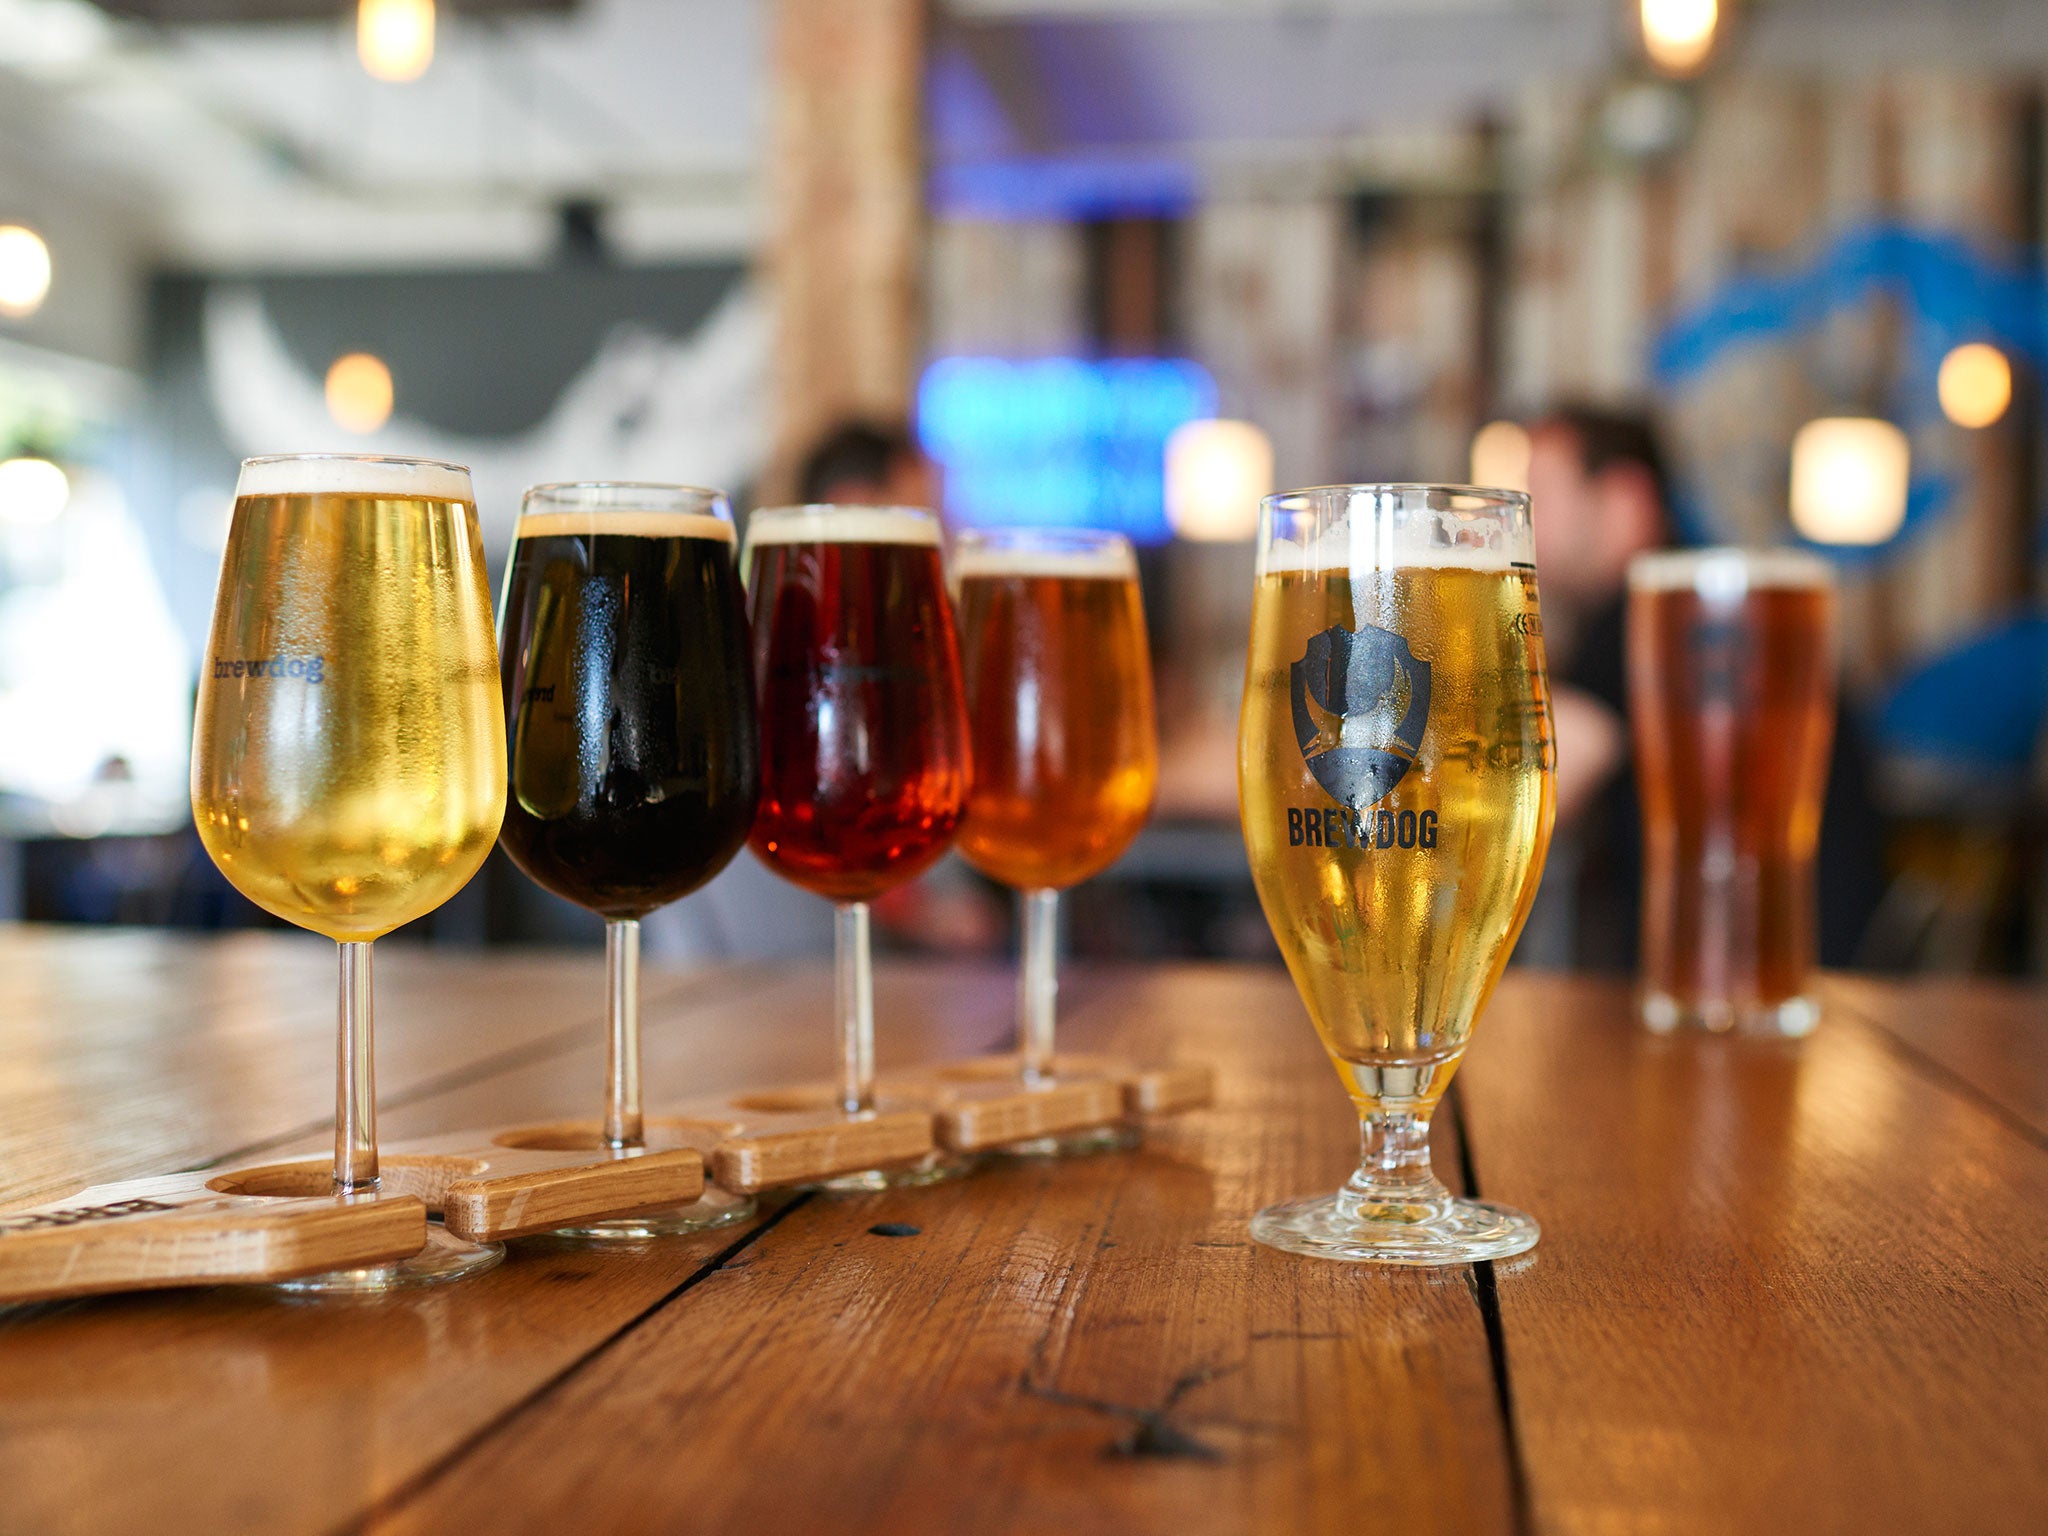 More than one in three people choose a half-pint when selecting a new beer